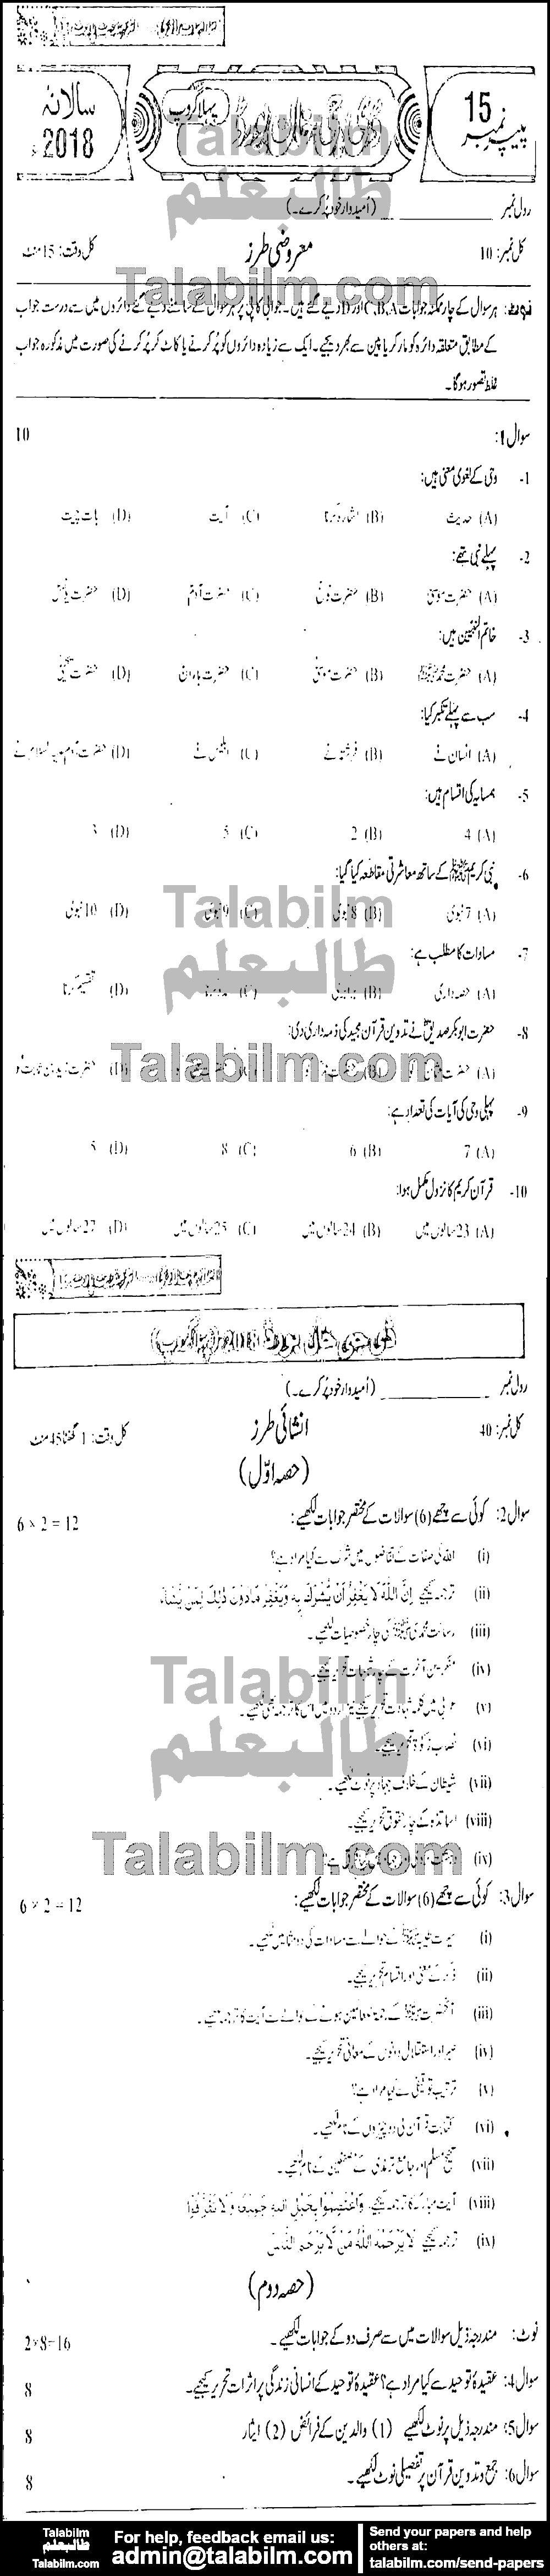 Islamiat Compulsory 0 past paper for Group-I 2018